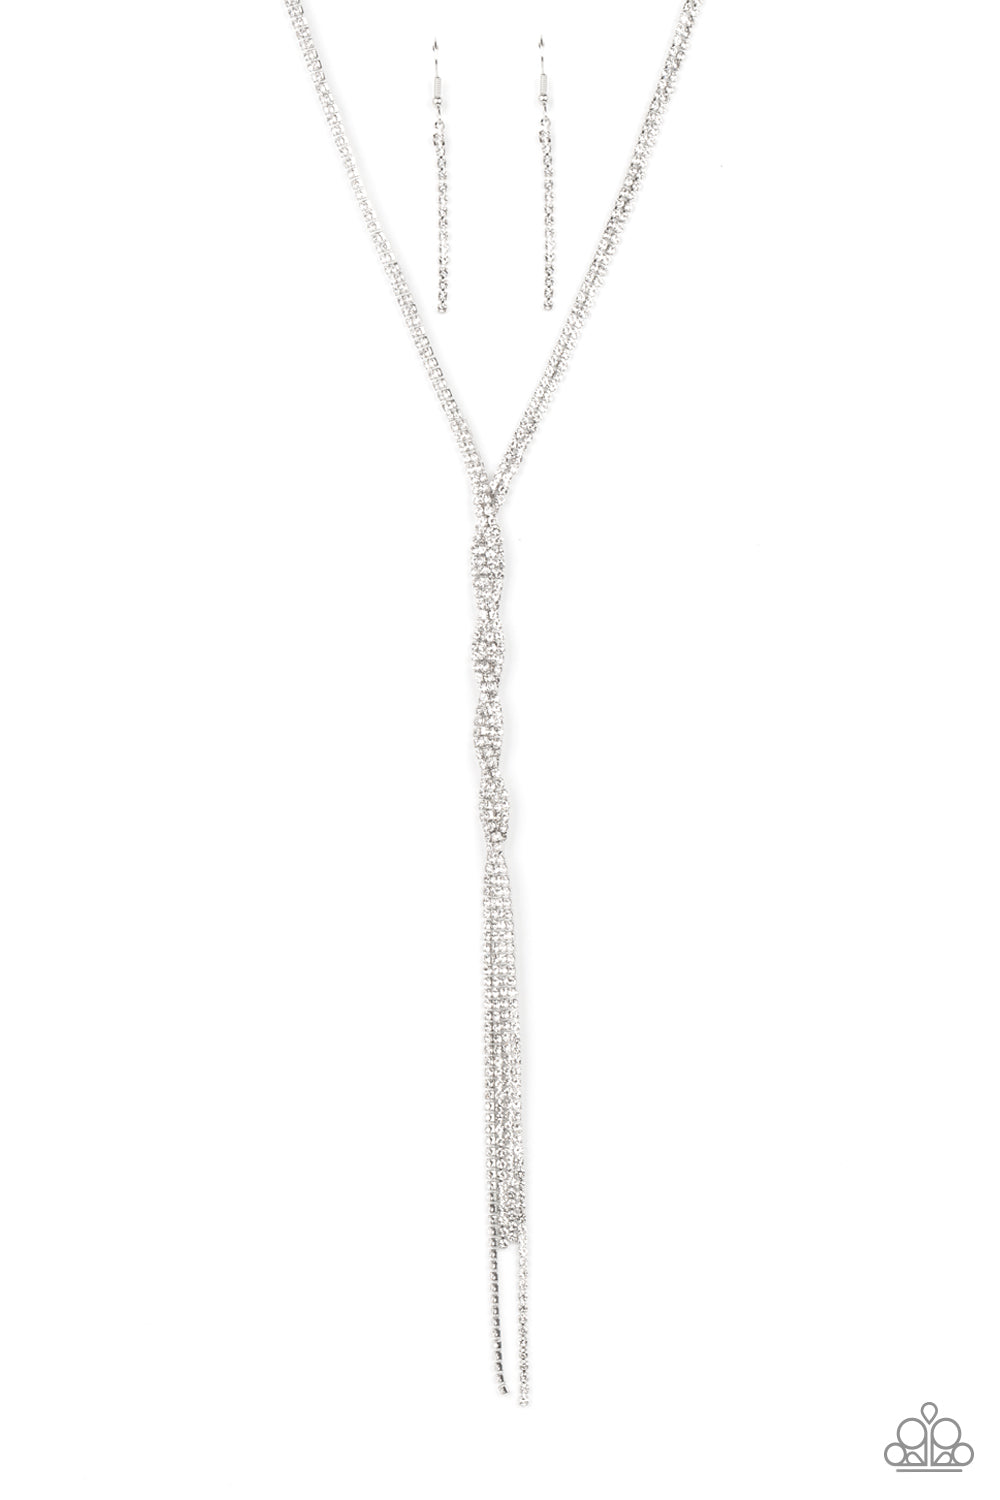 Paparazzi Impressively Icy White Short Necklace - Life Of The Party Exclusive March 2022